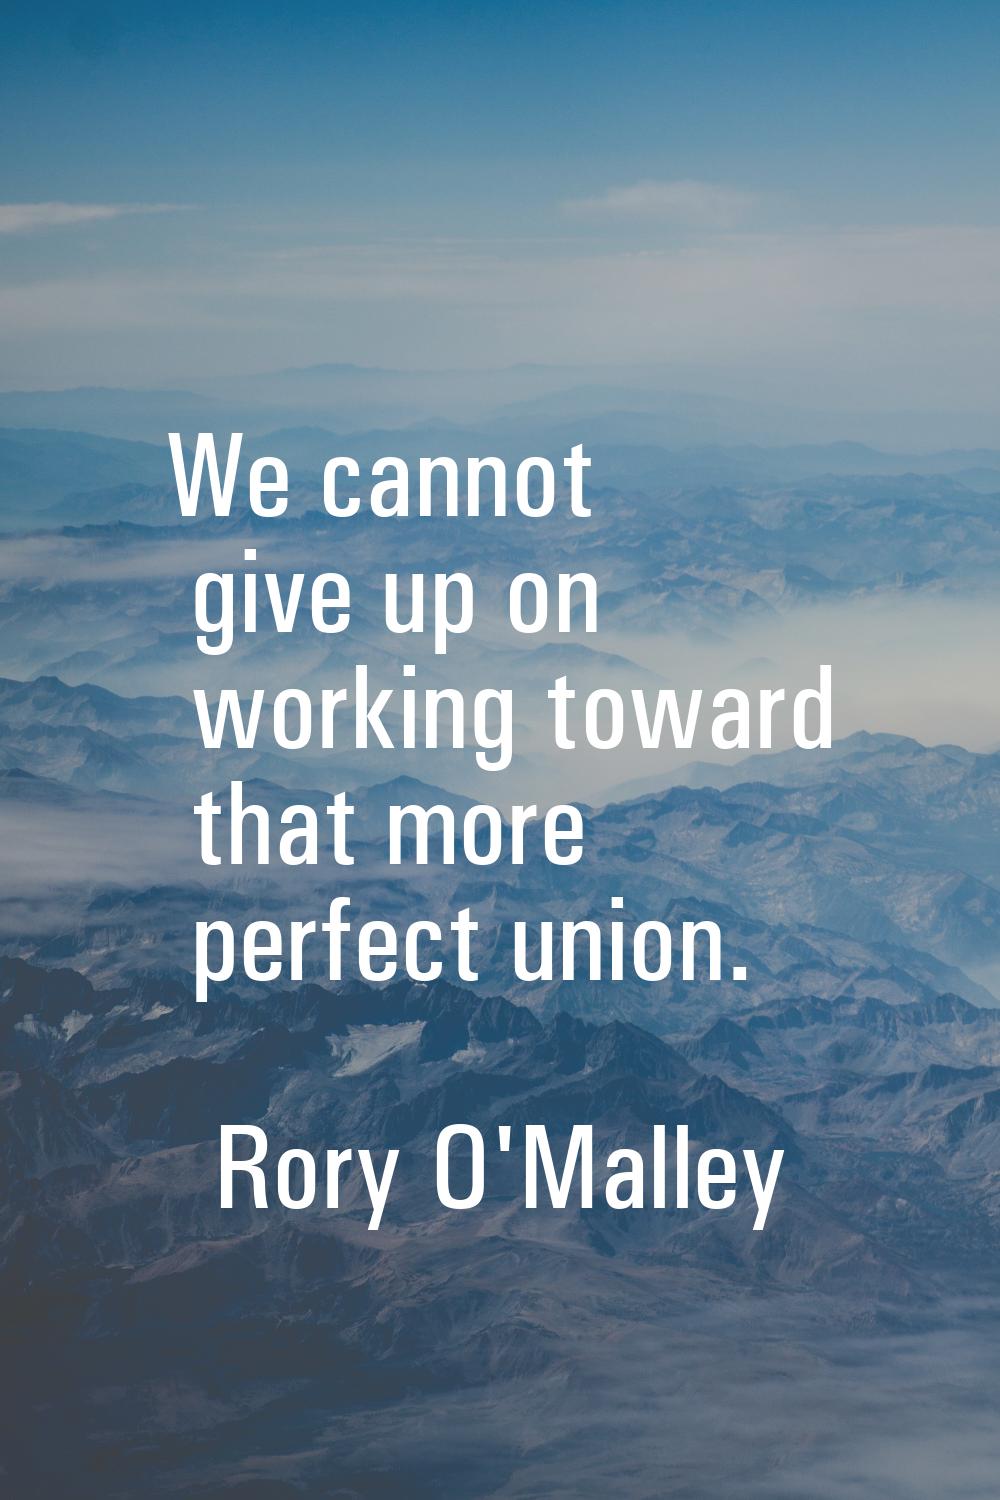 We cannot give up on working toward that more perfect union.